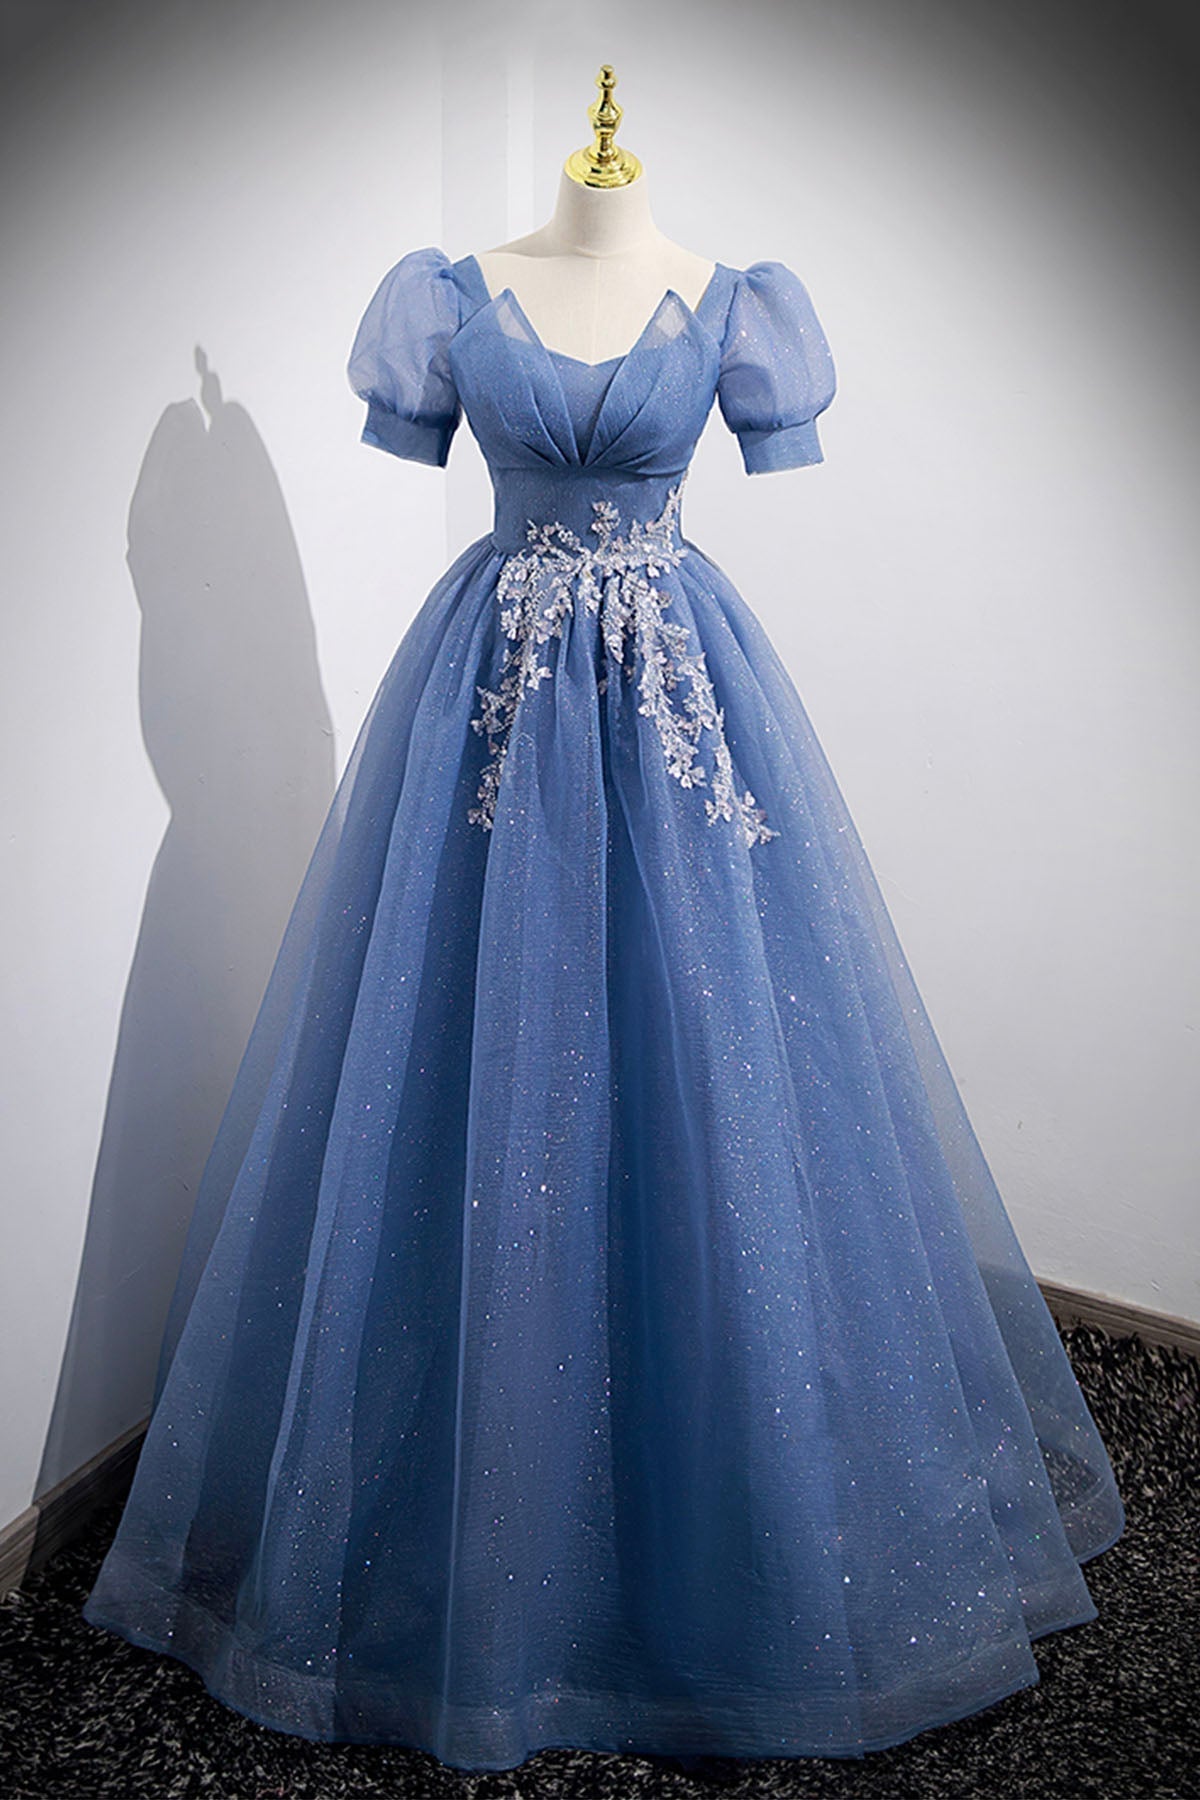 Blue Tulle Lace Floor Length Prom Dress Outfits For Girls, Blue Short Sleeve Evening Dress